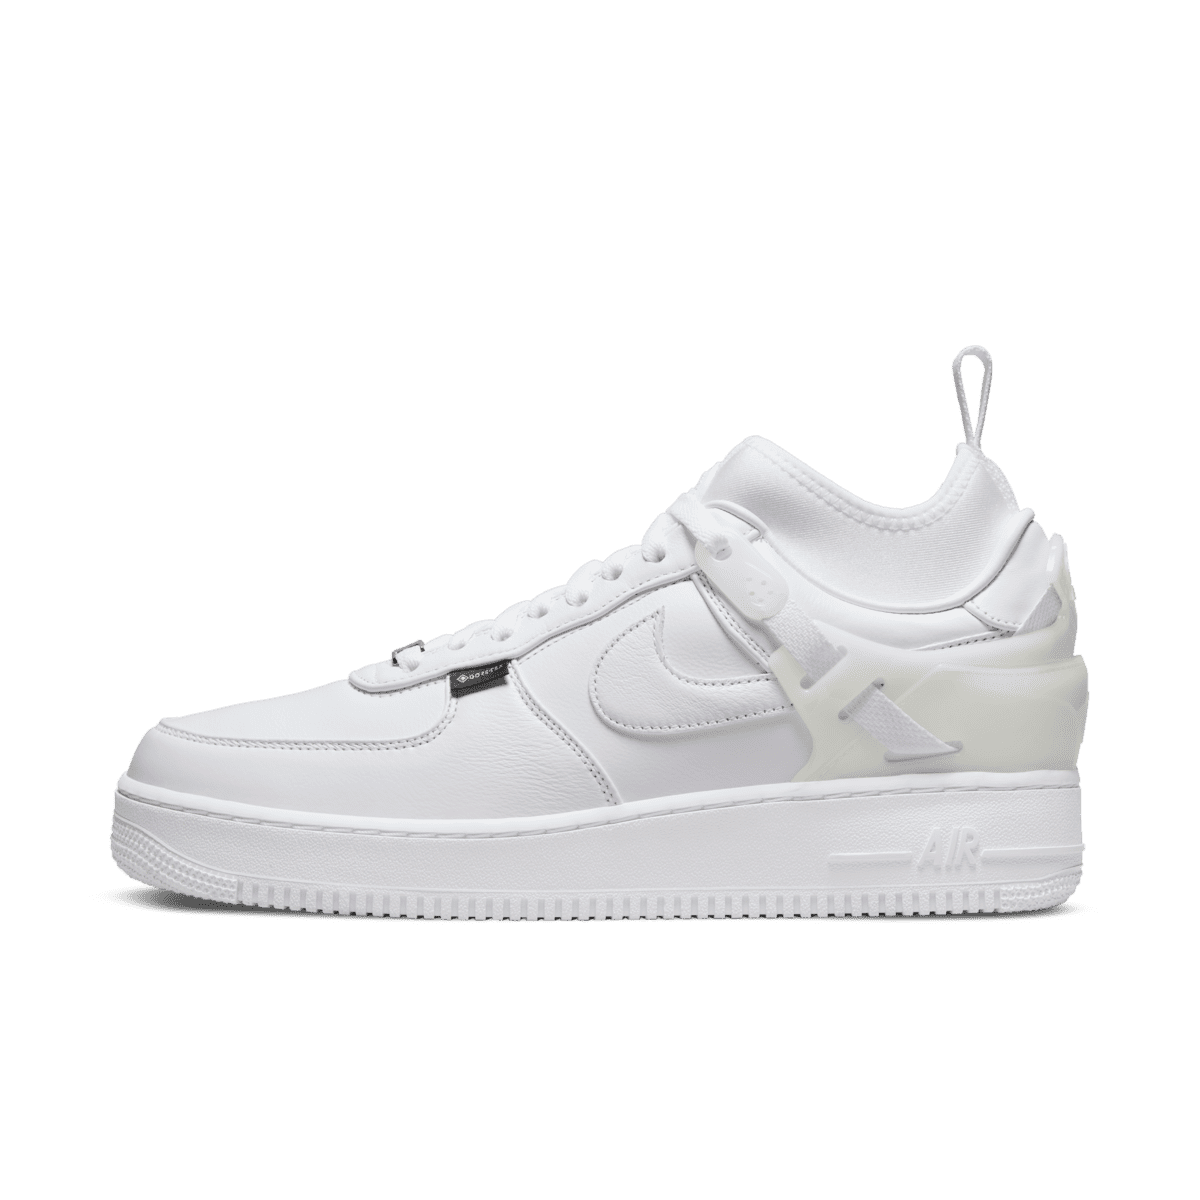 UNDERCOVER x Nike Air Force 1 Low 'White'